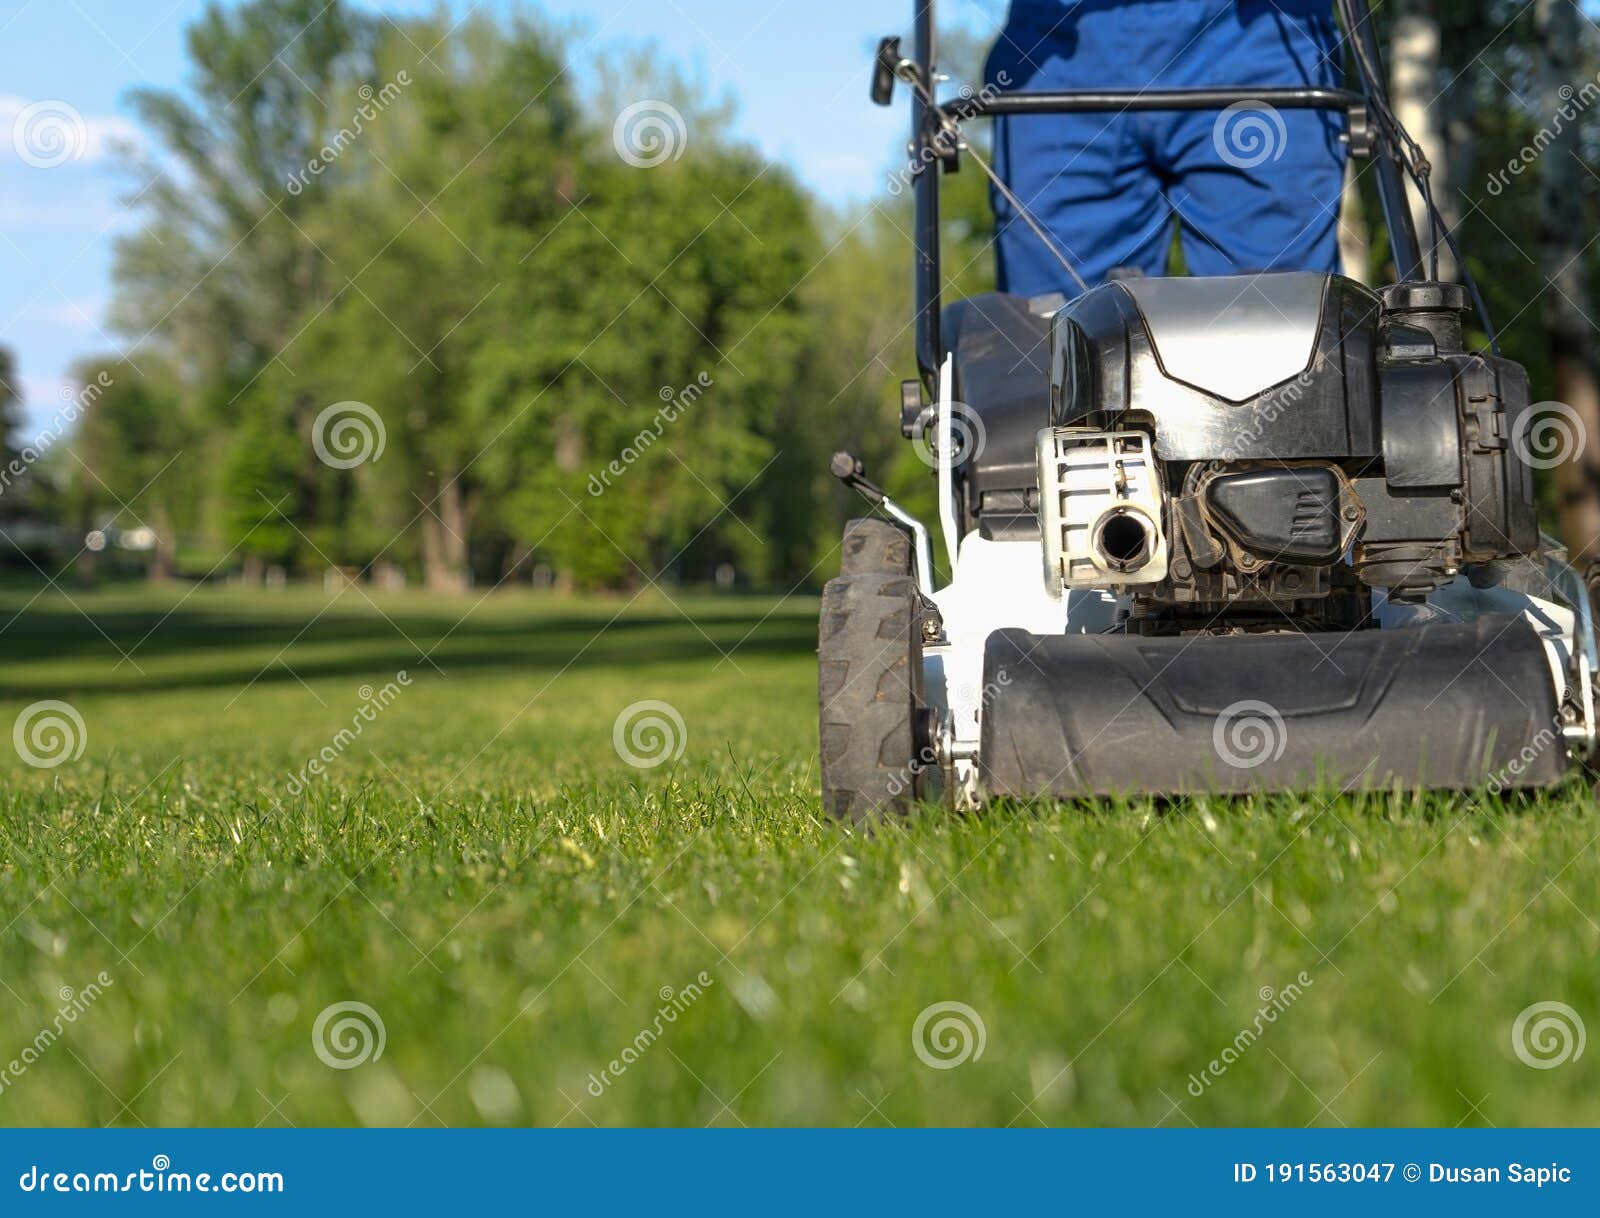 a person mowing the grass